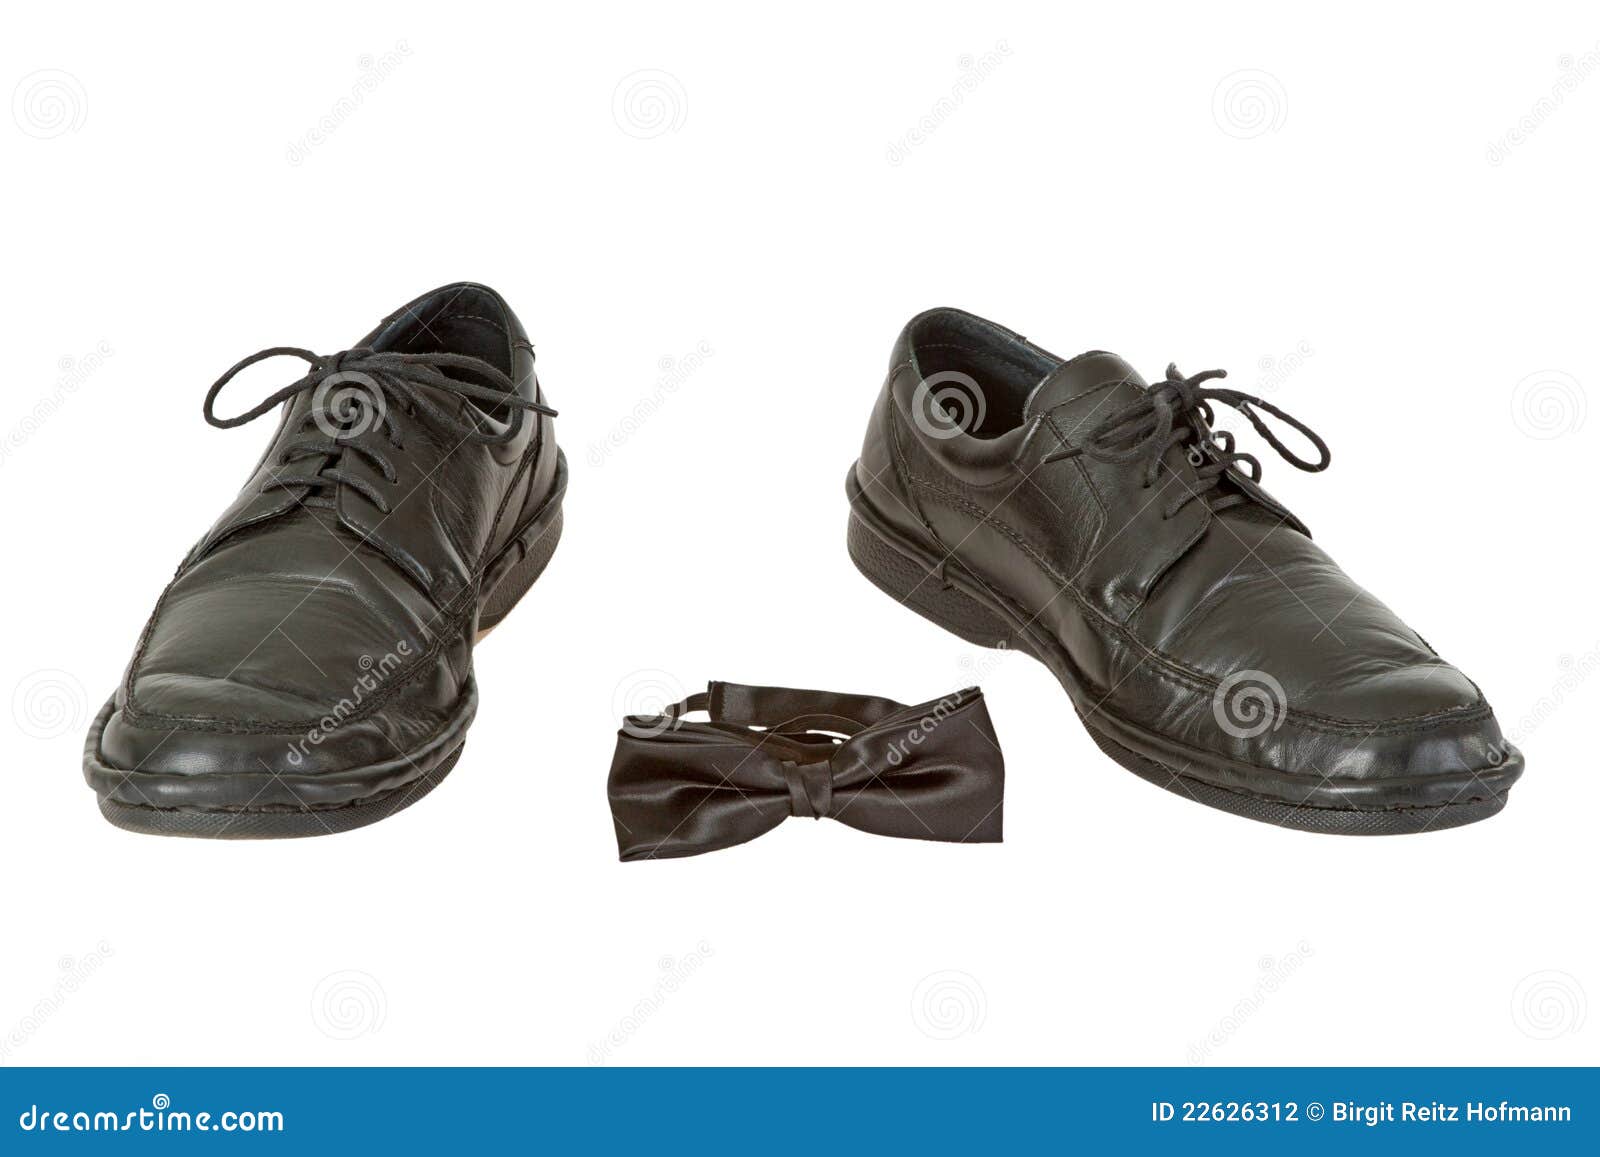 Man s shoe and bow tie stock photo. Image of background - 22626312